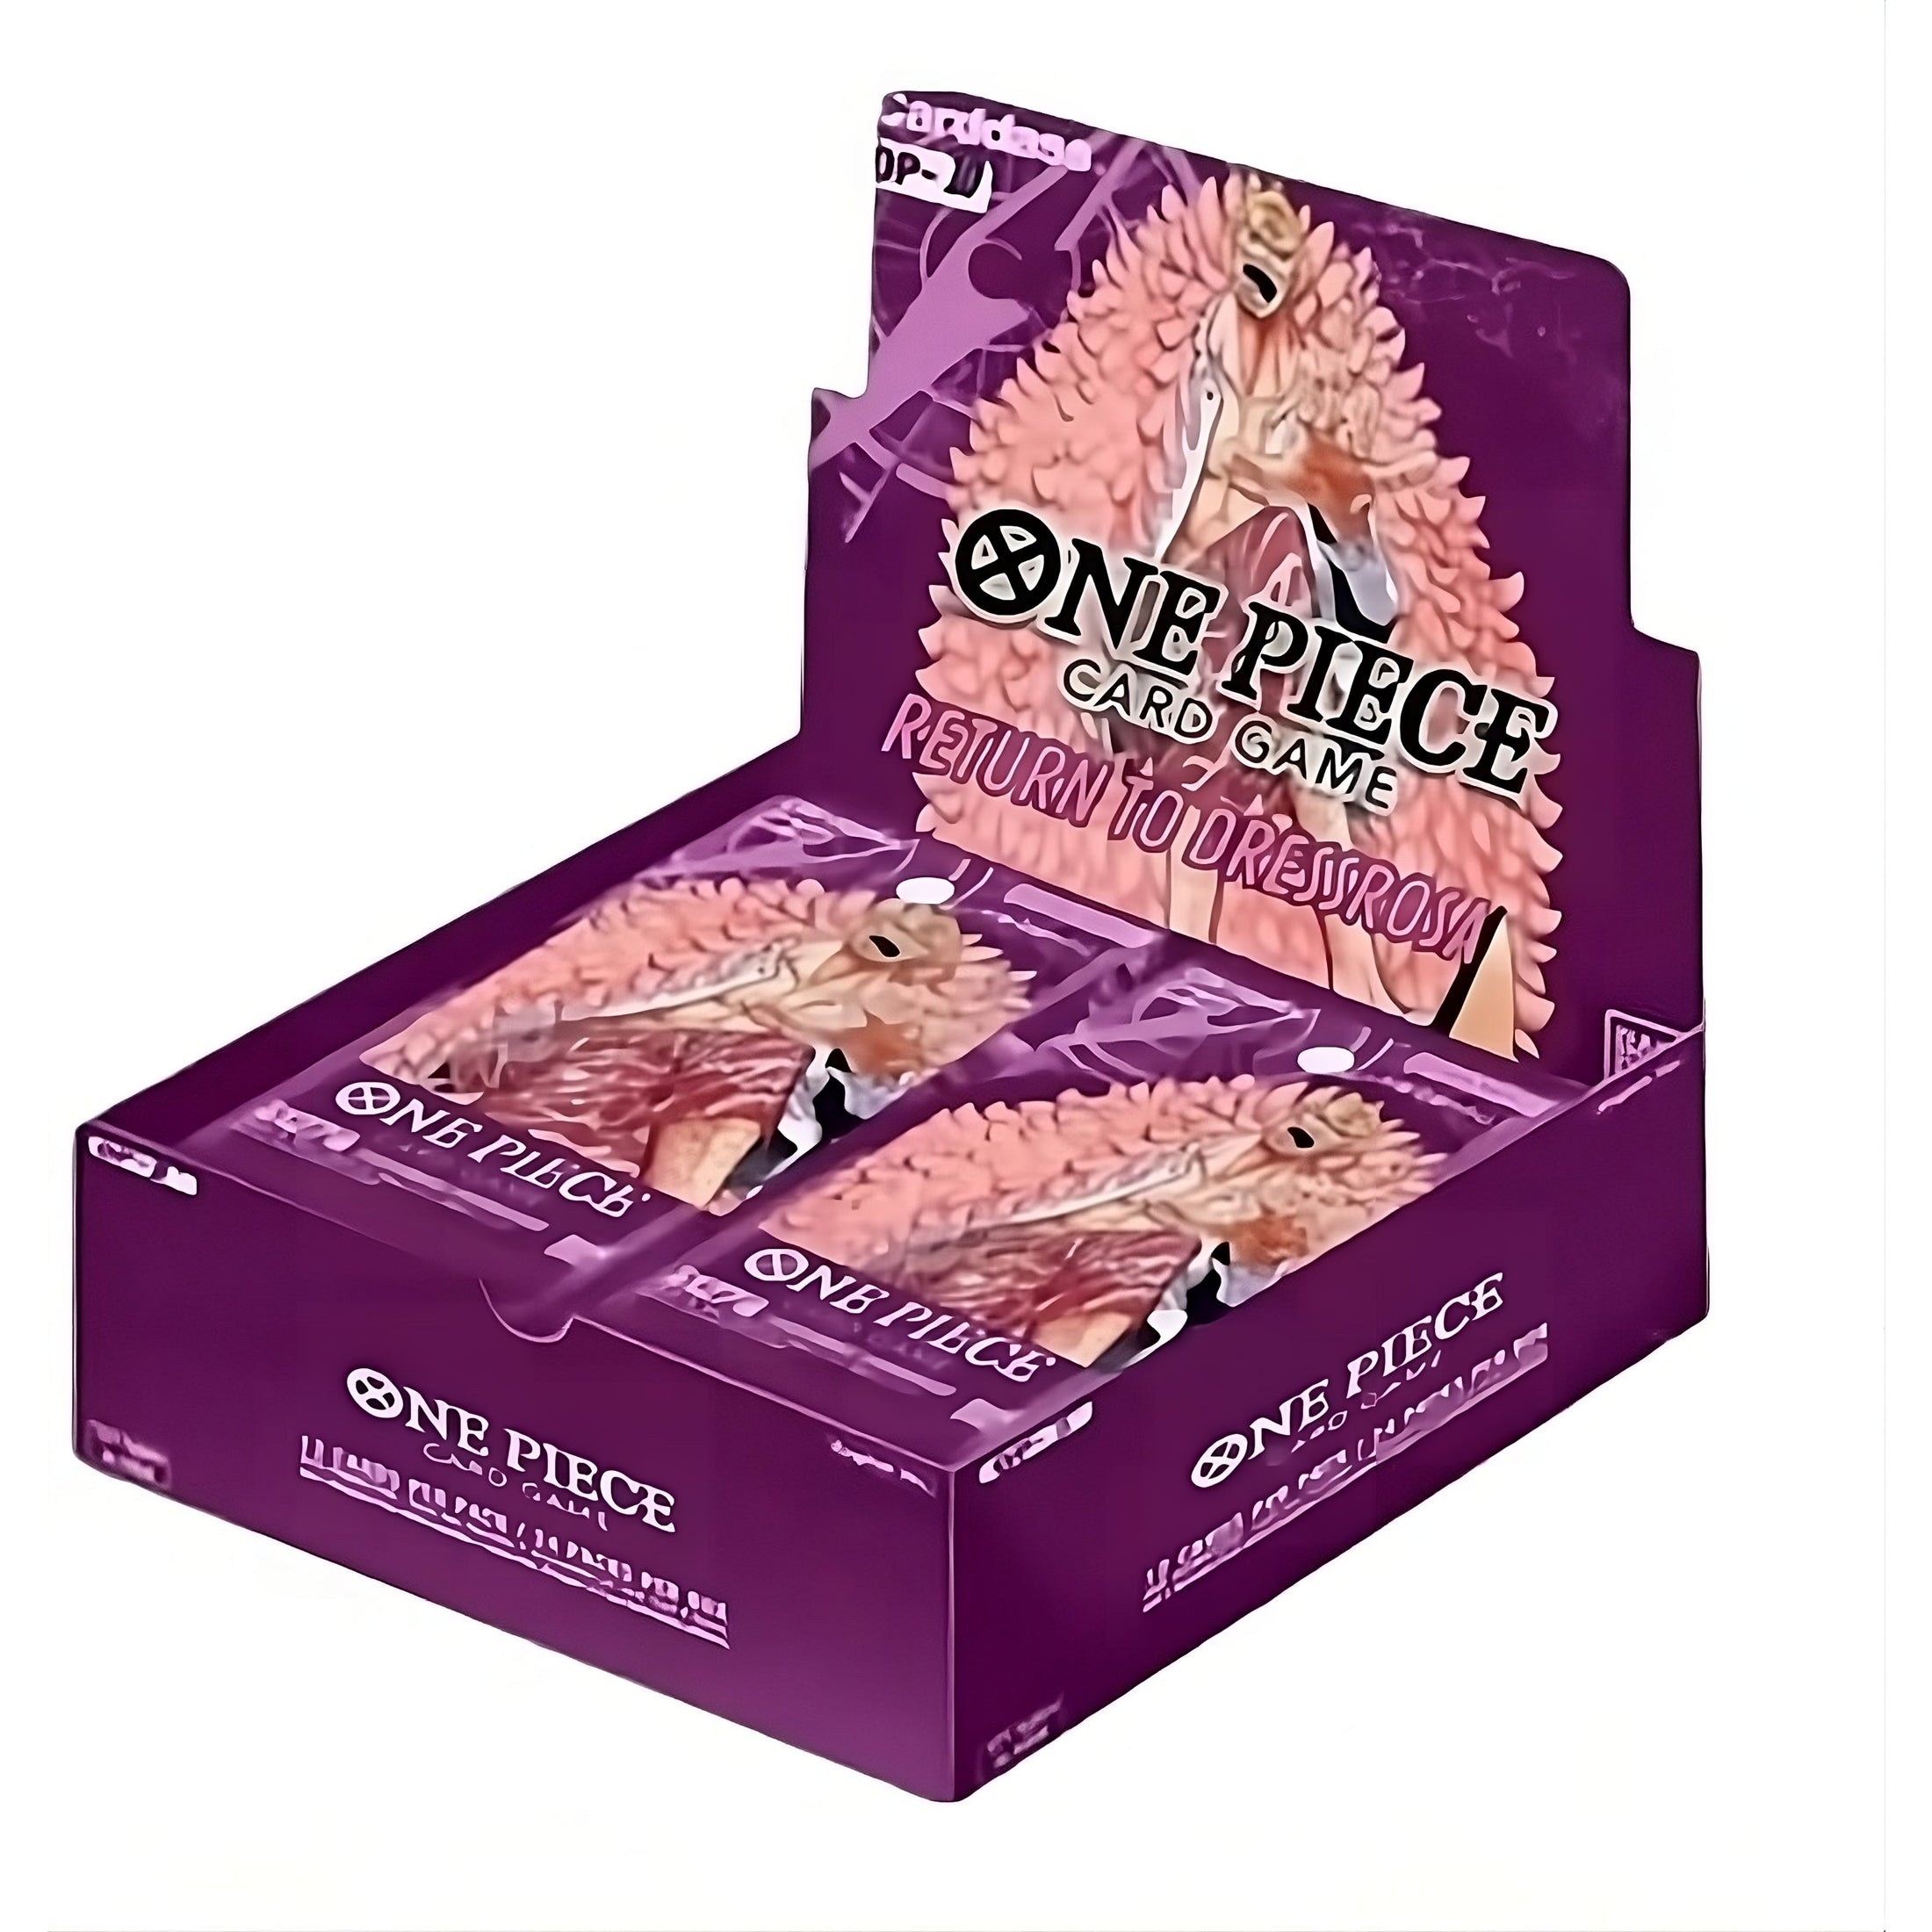 ""PRE-ORDER"" Box One Piece Card Game OP-10 ENG